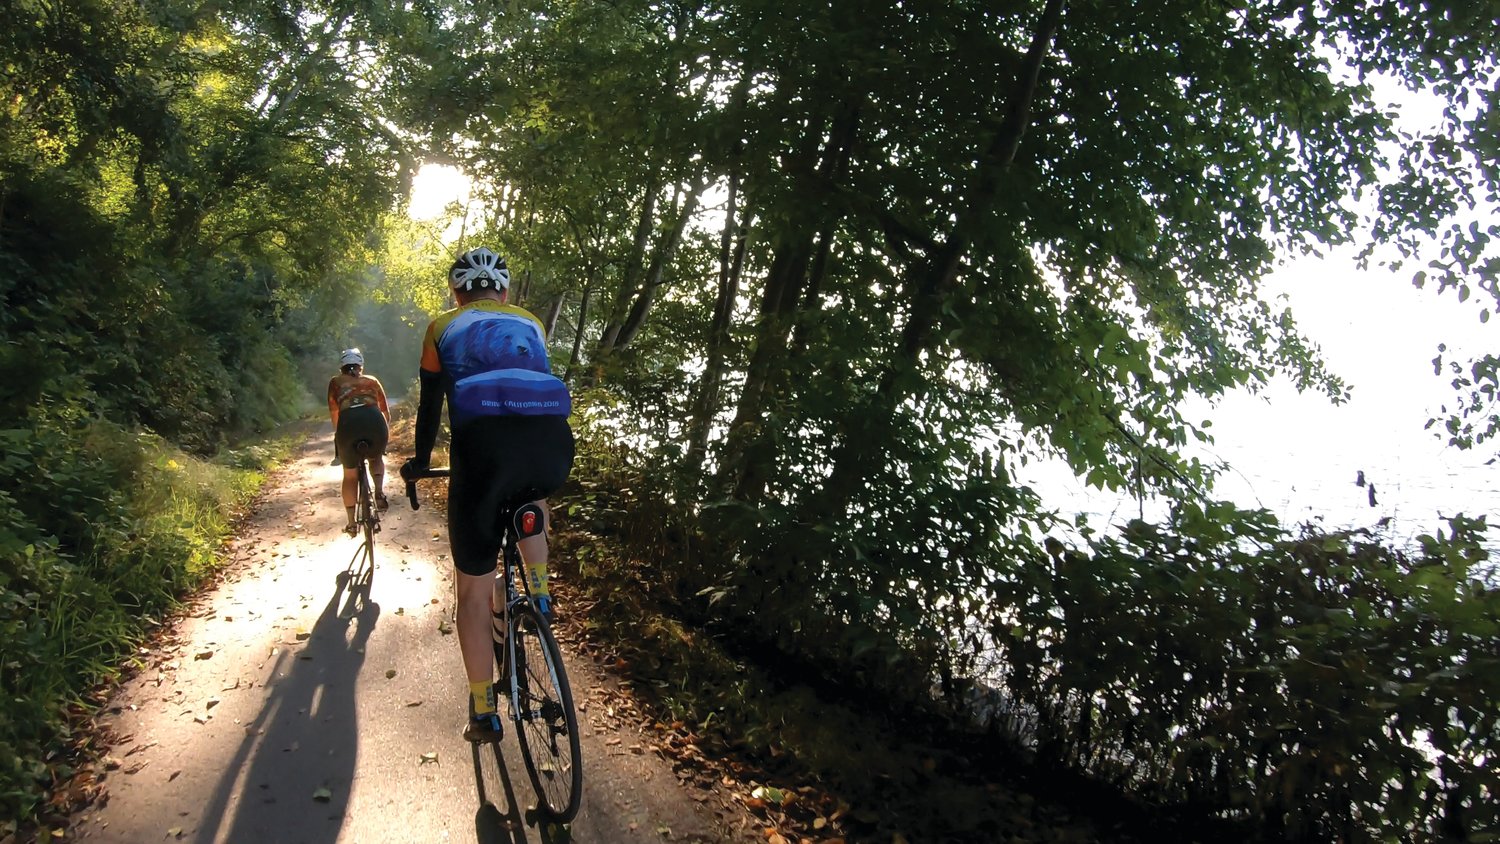 Sunlight filters through the trees as cyclists make their way along the trail.